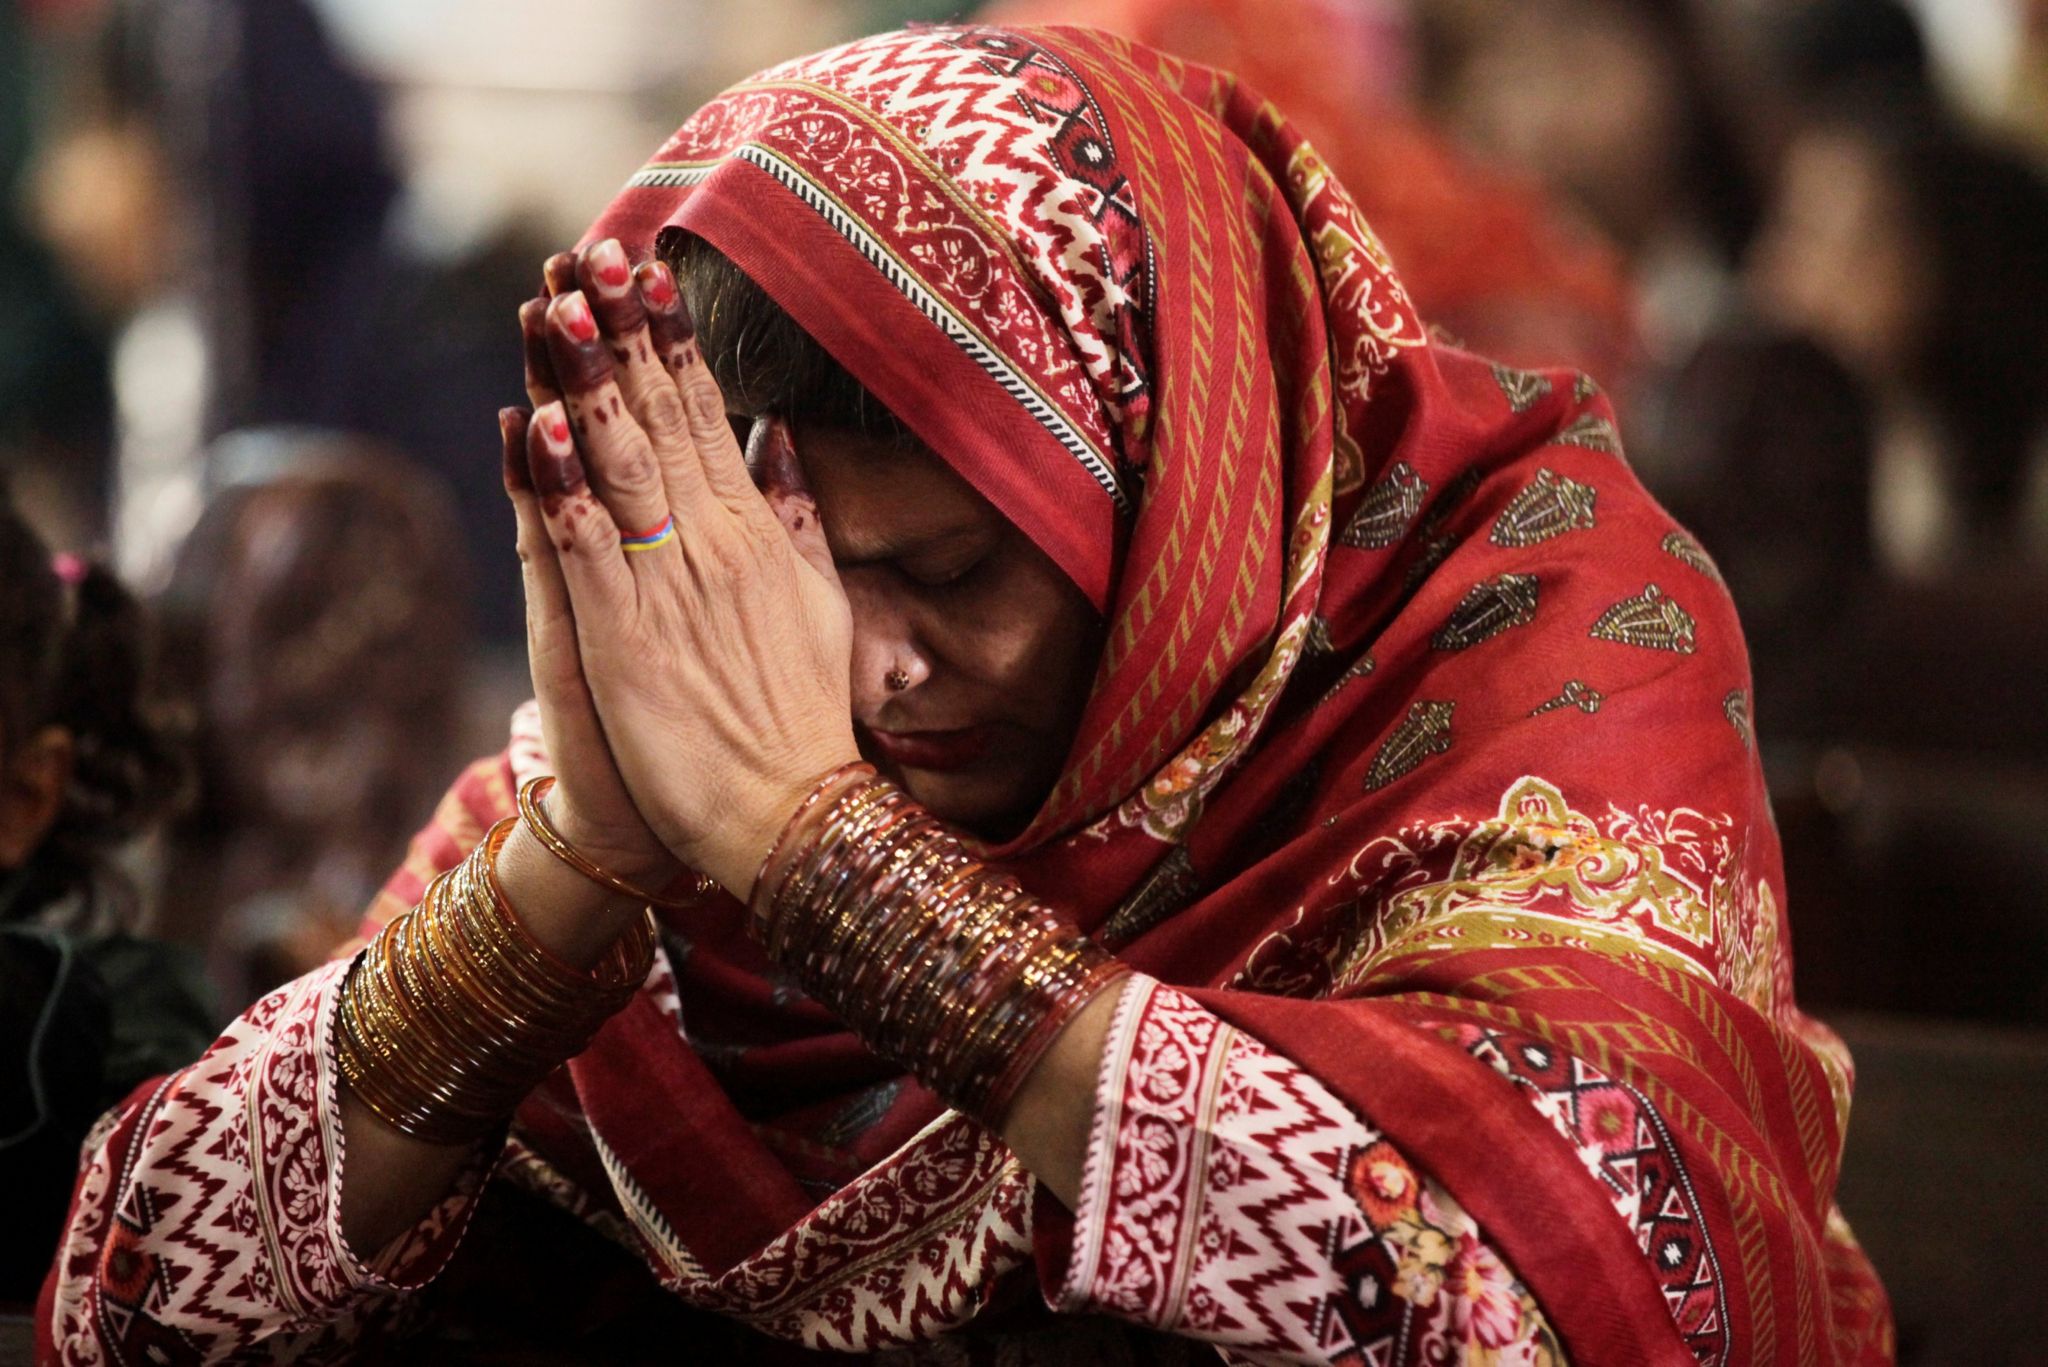 A woman prays during a Christmas service at the Sacred Heart Cathedral in Lahor